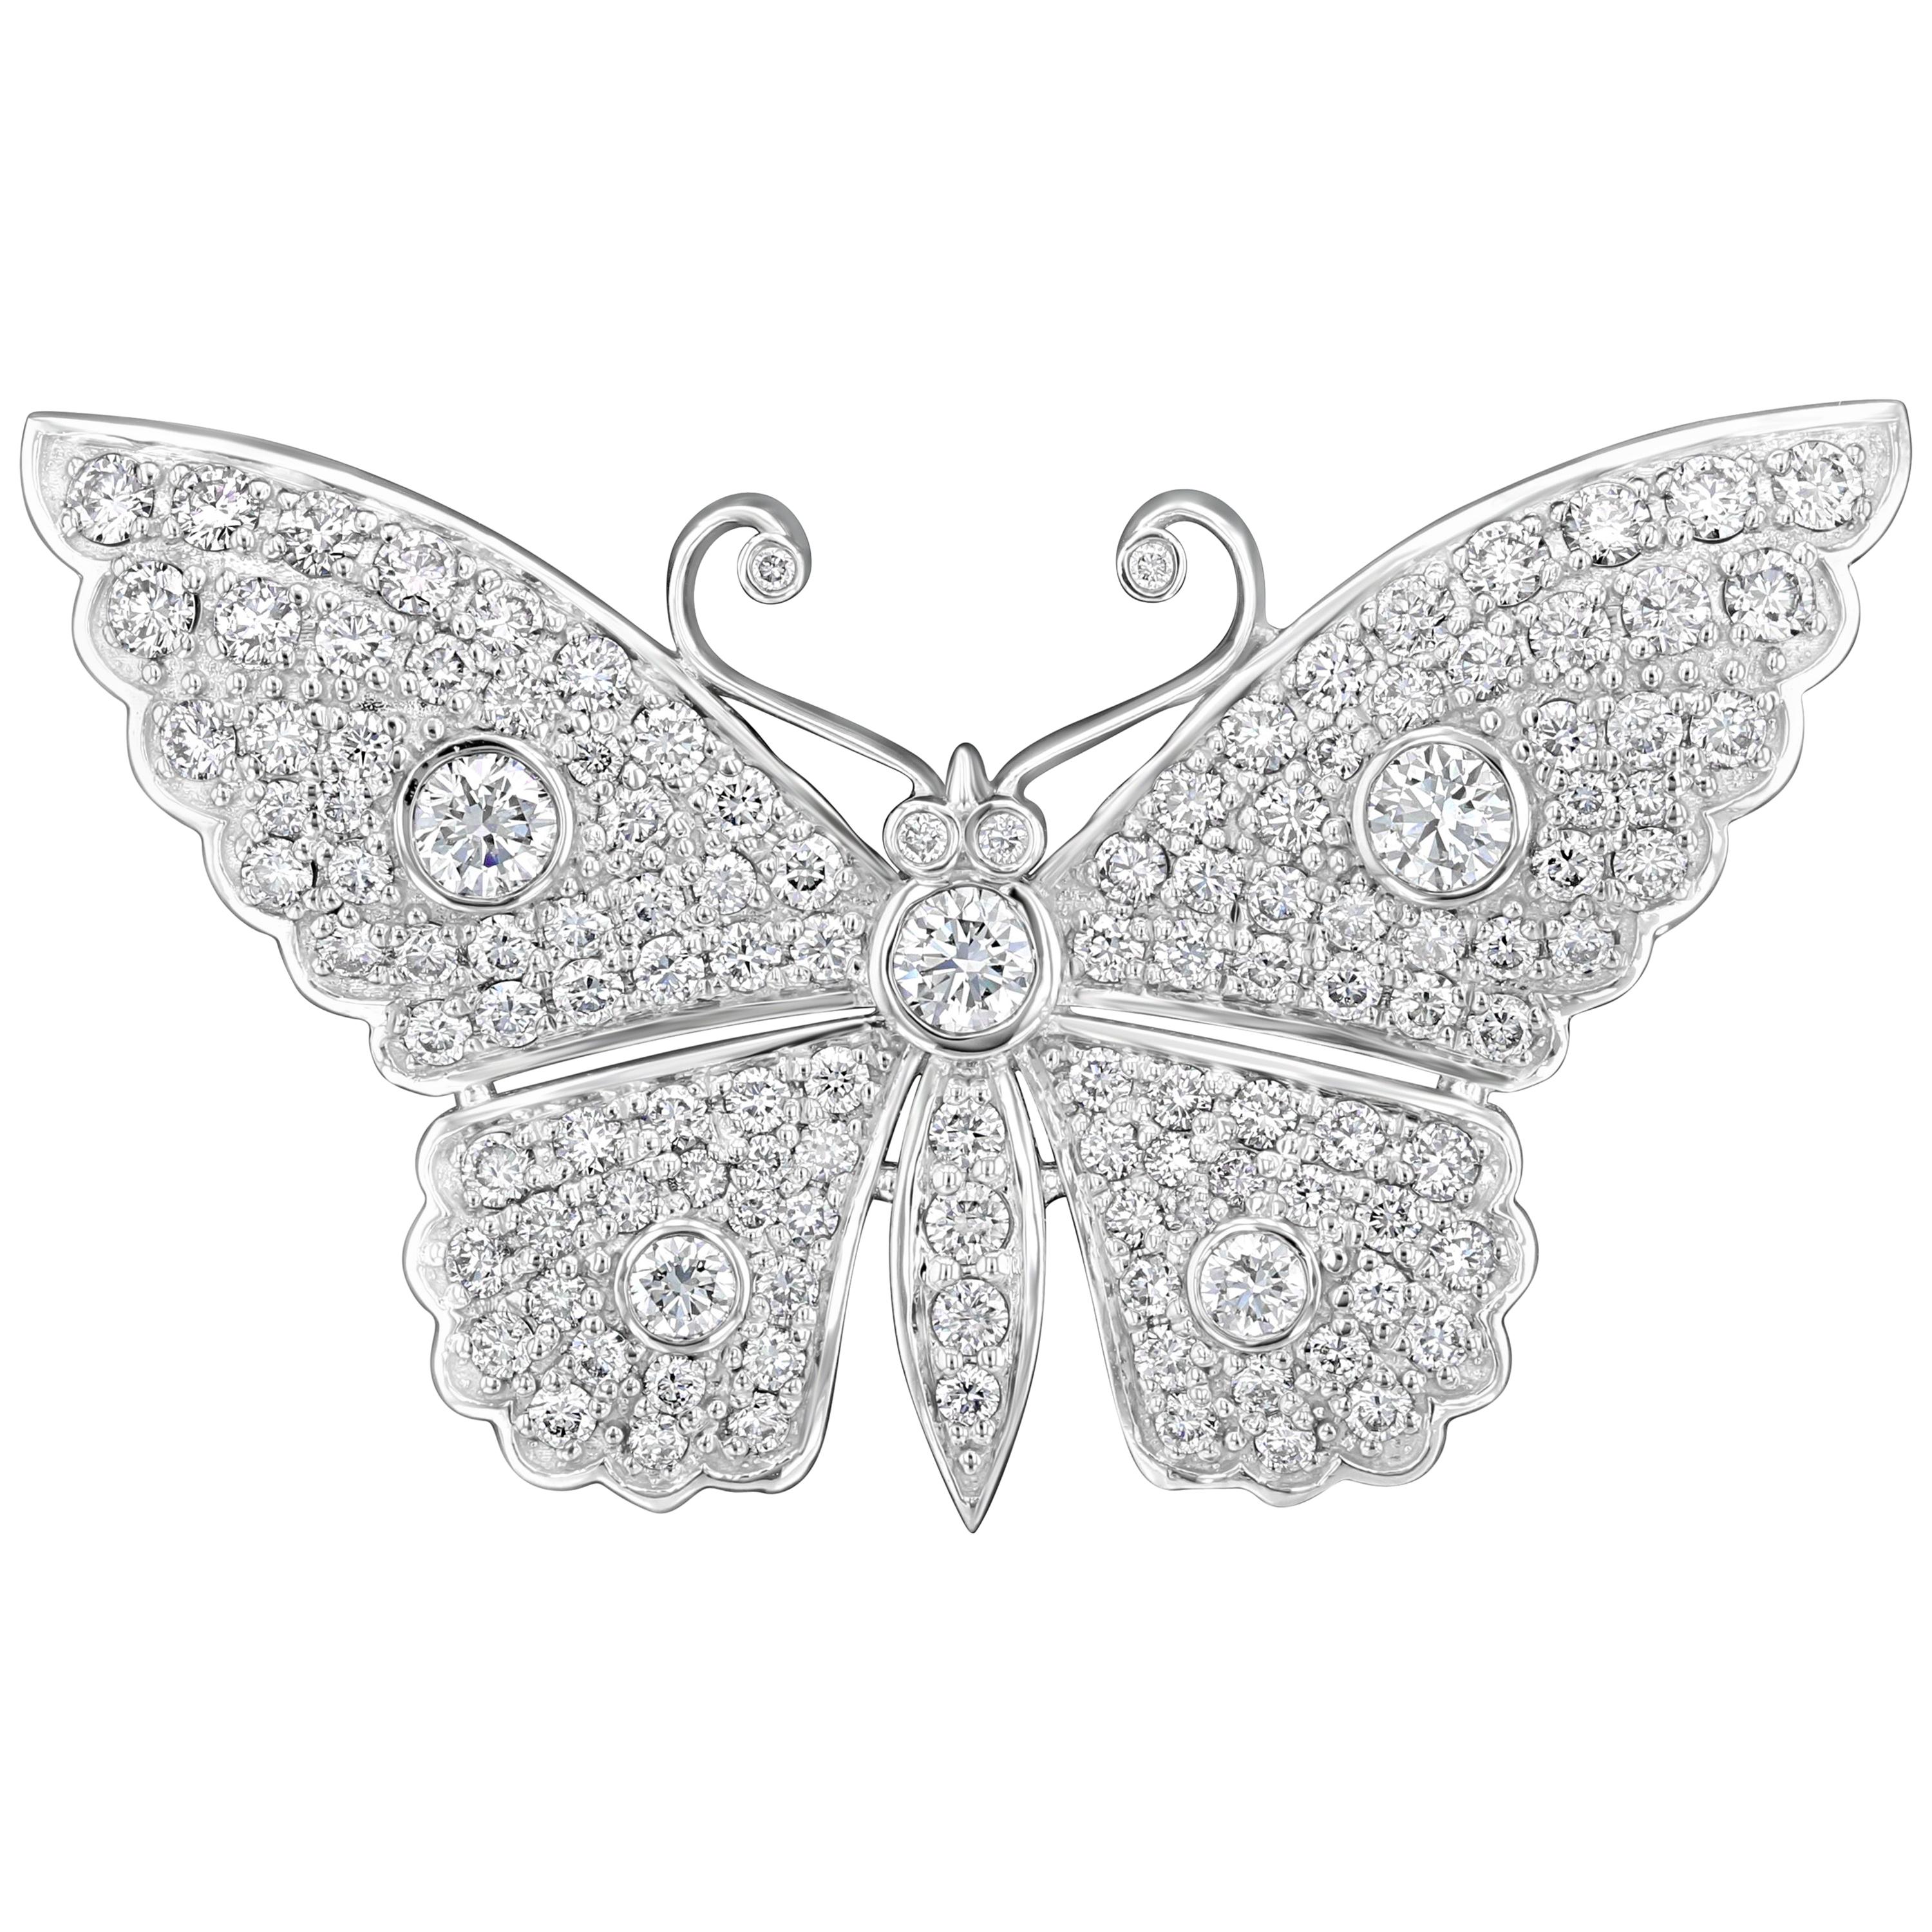 3.14 Carat Diamond Butterfly Pin For Sale